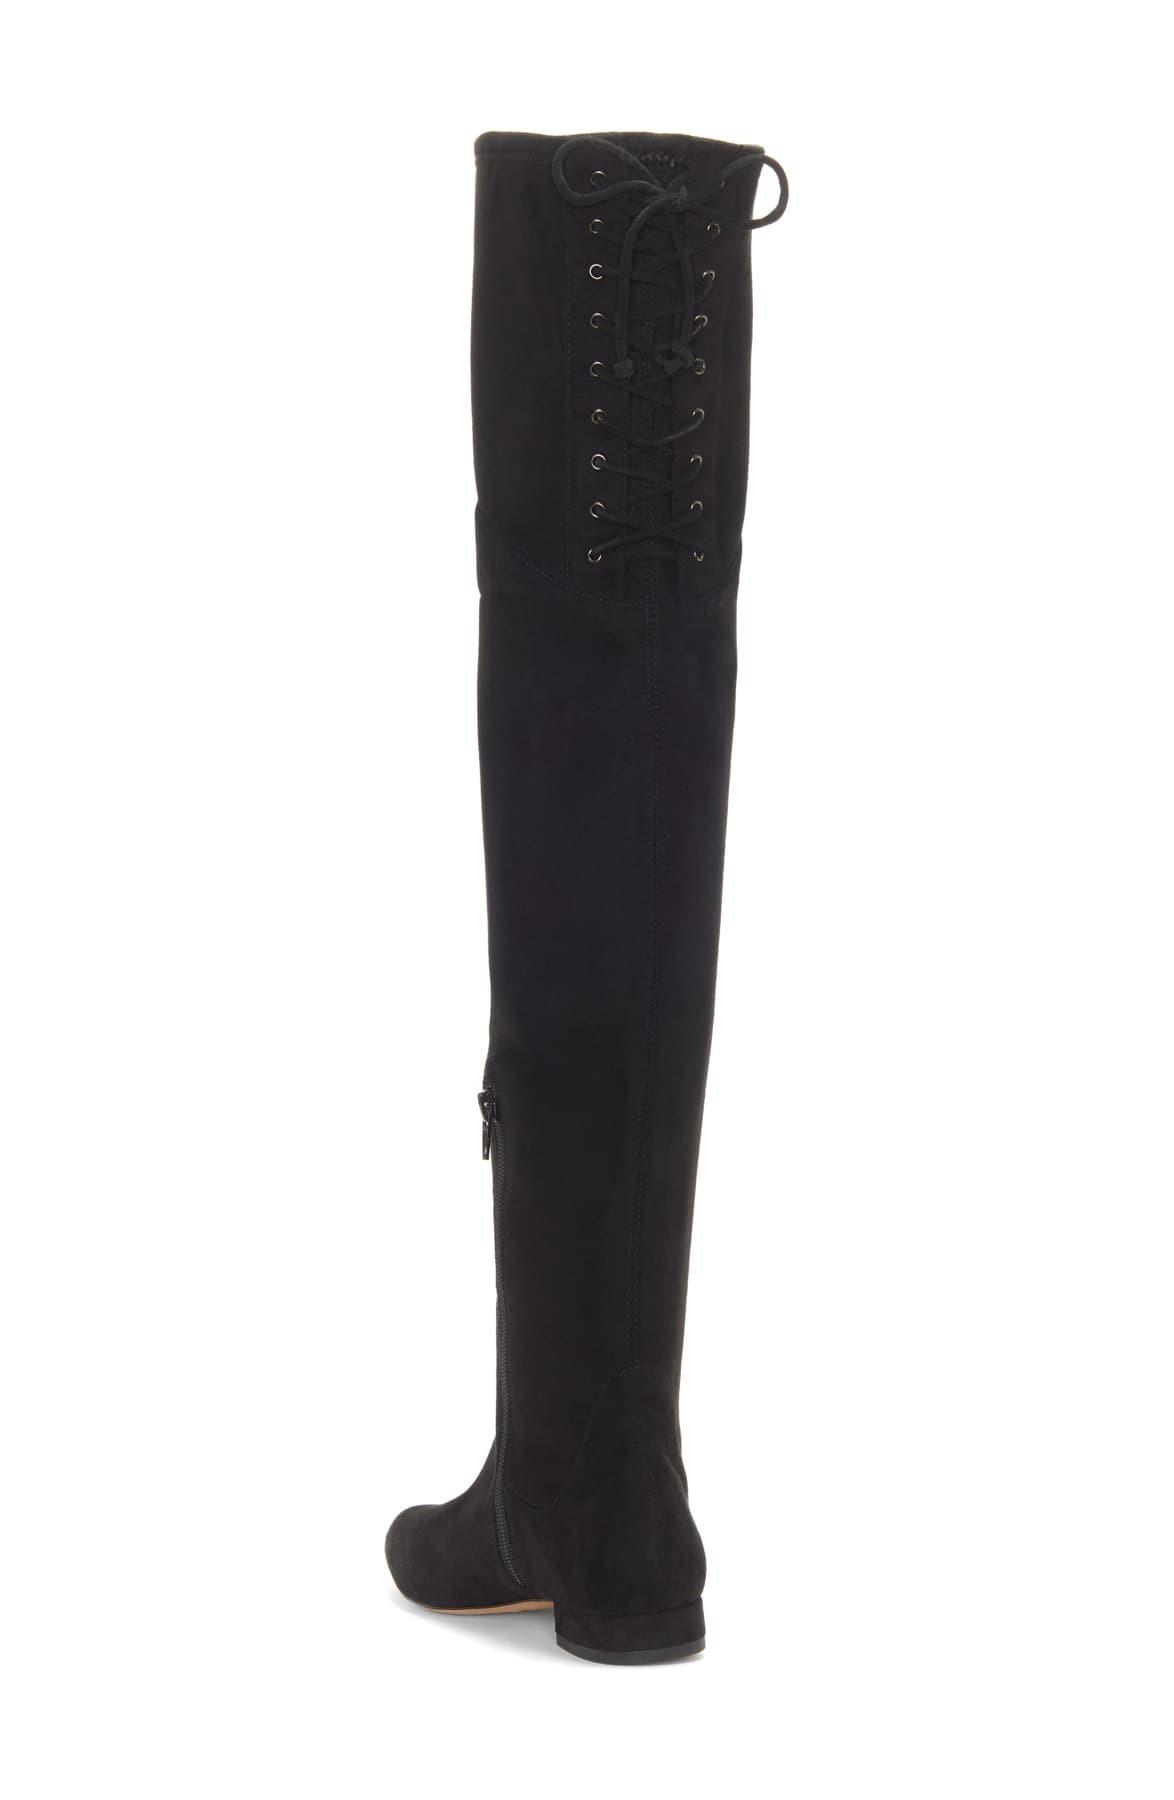 Enzo Angiolini Meloren Over The Knee Boots in Black 01 (Black) - Lyst